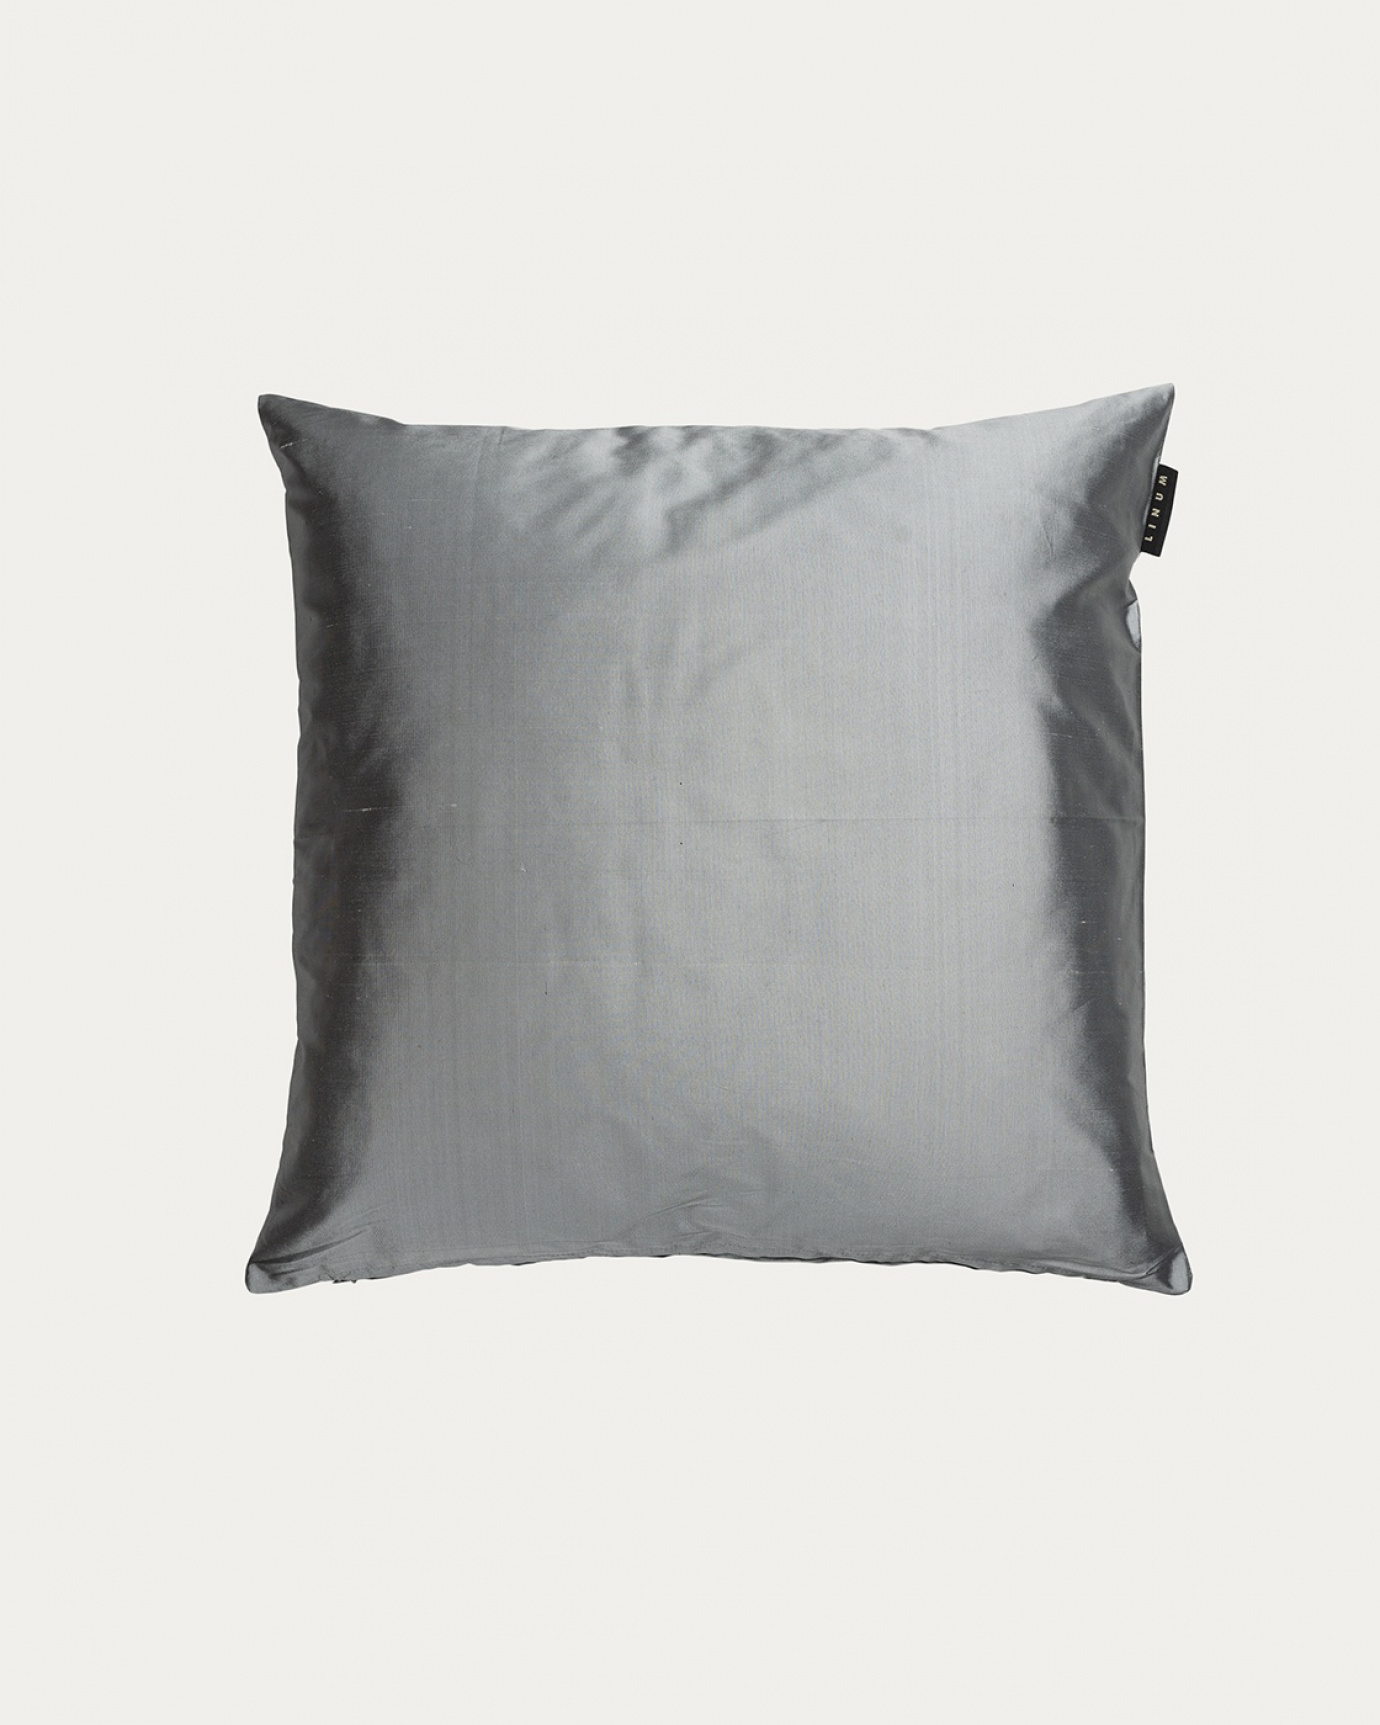 Product image light grey SILK cushion cover made of 100% dupion silk that gives a nice lustre from LINUM DESIGN. Size 40x40 cm.